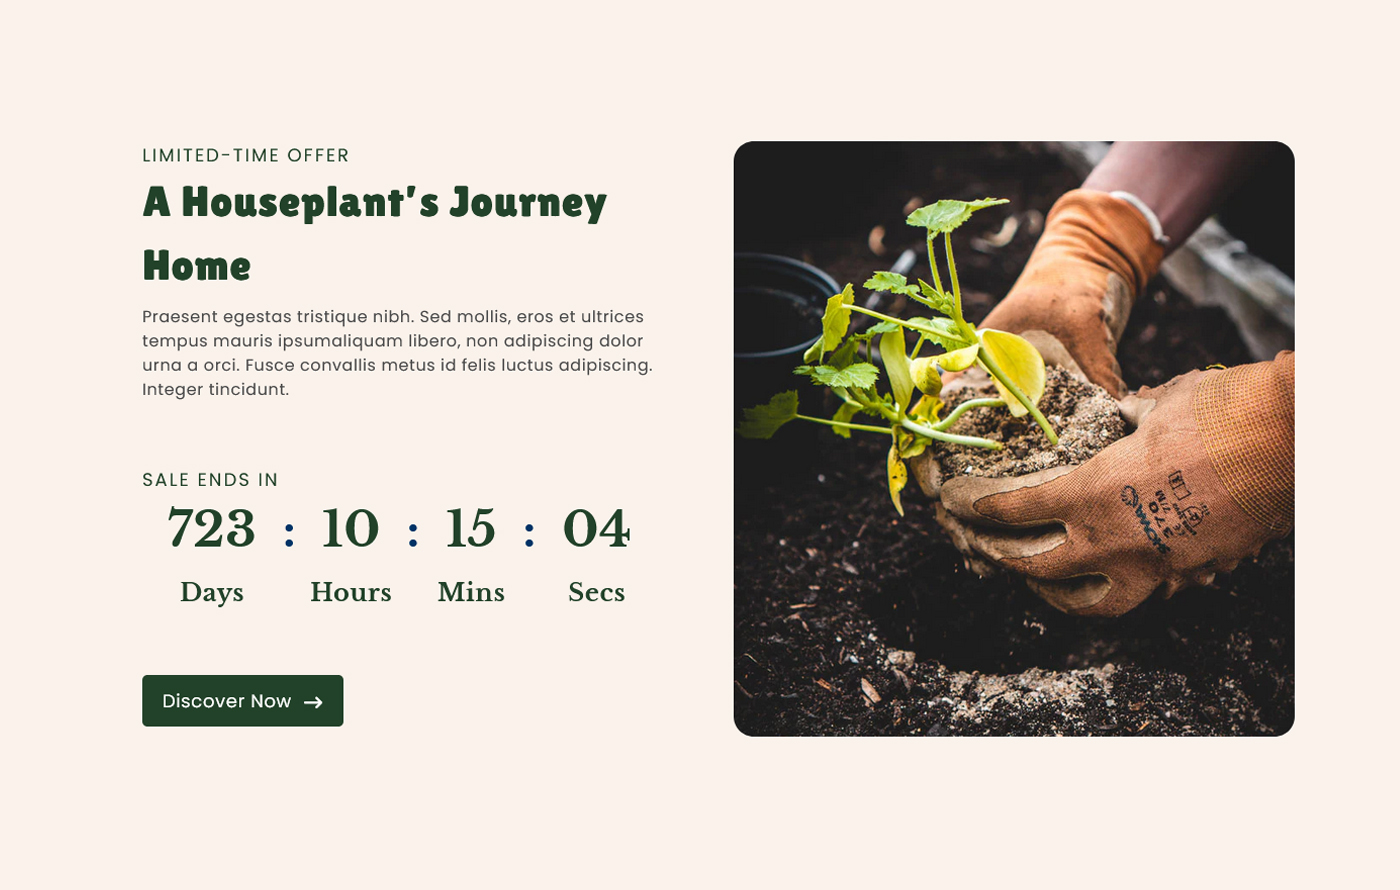 Plantify - Free Plant Shopify template built by Pagefly